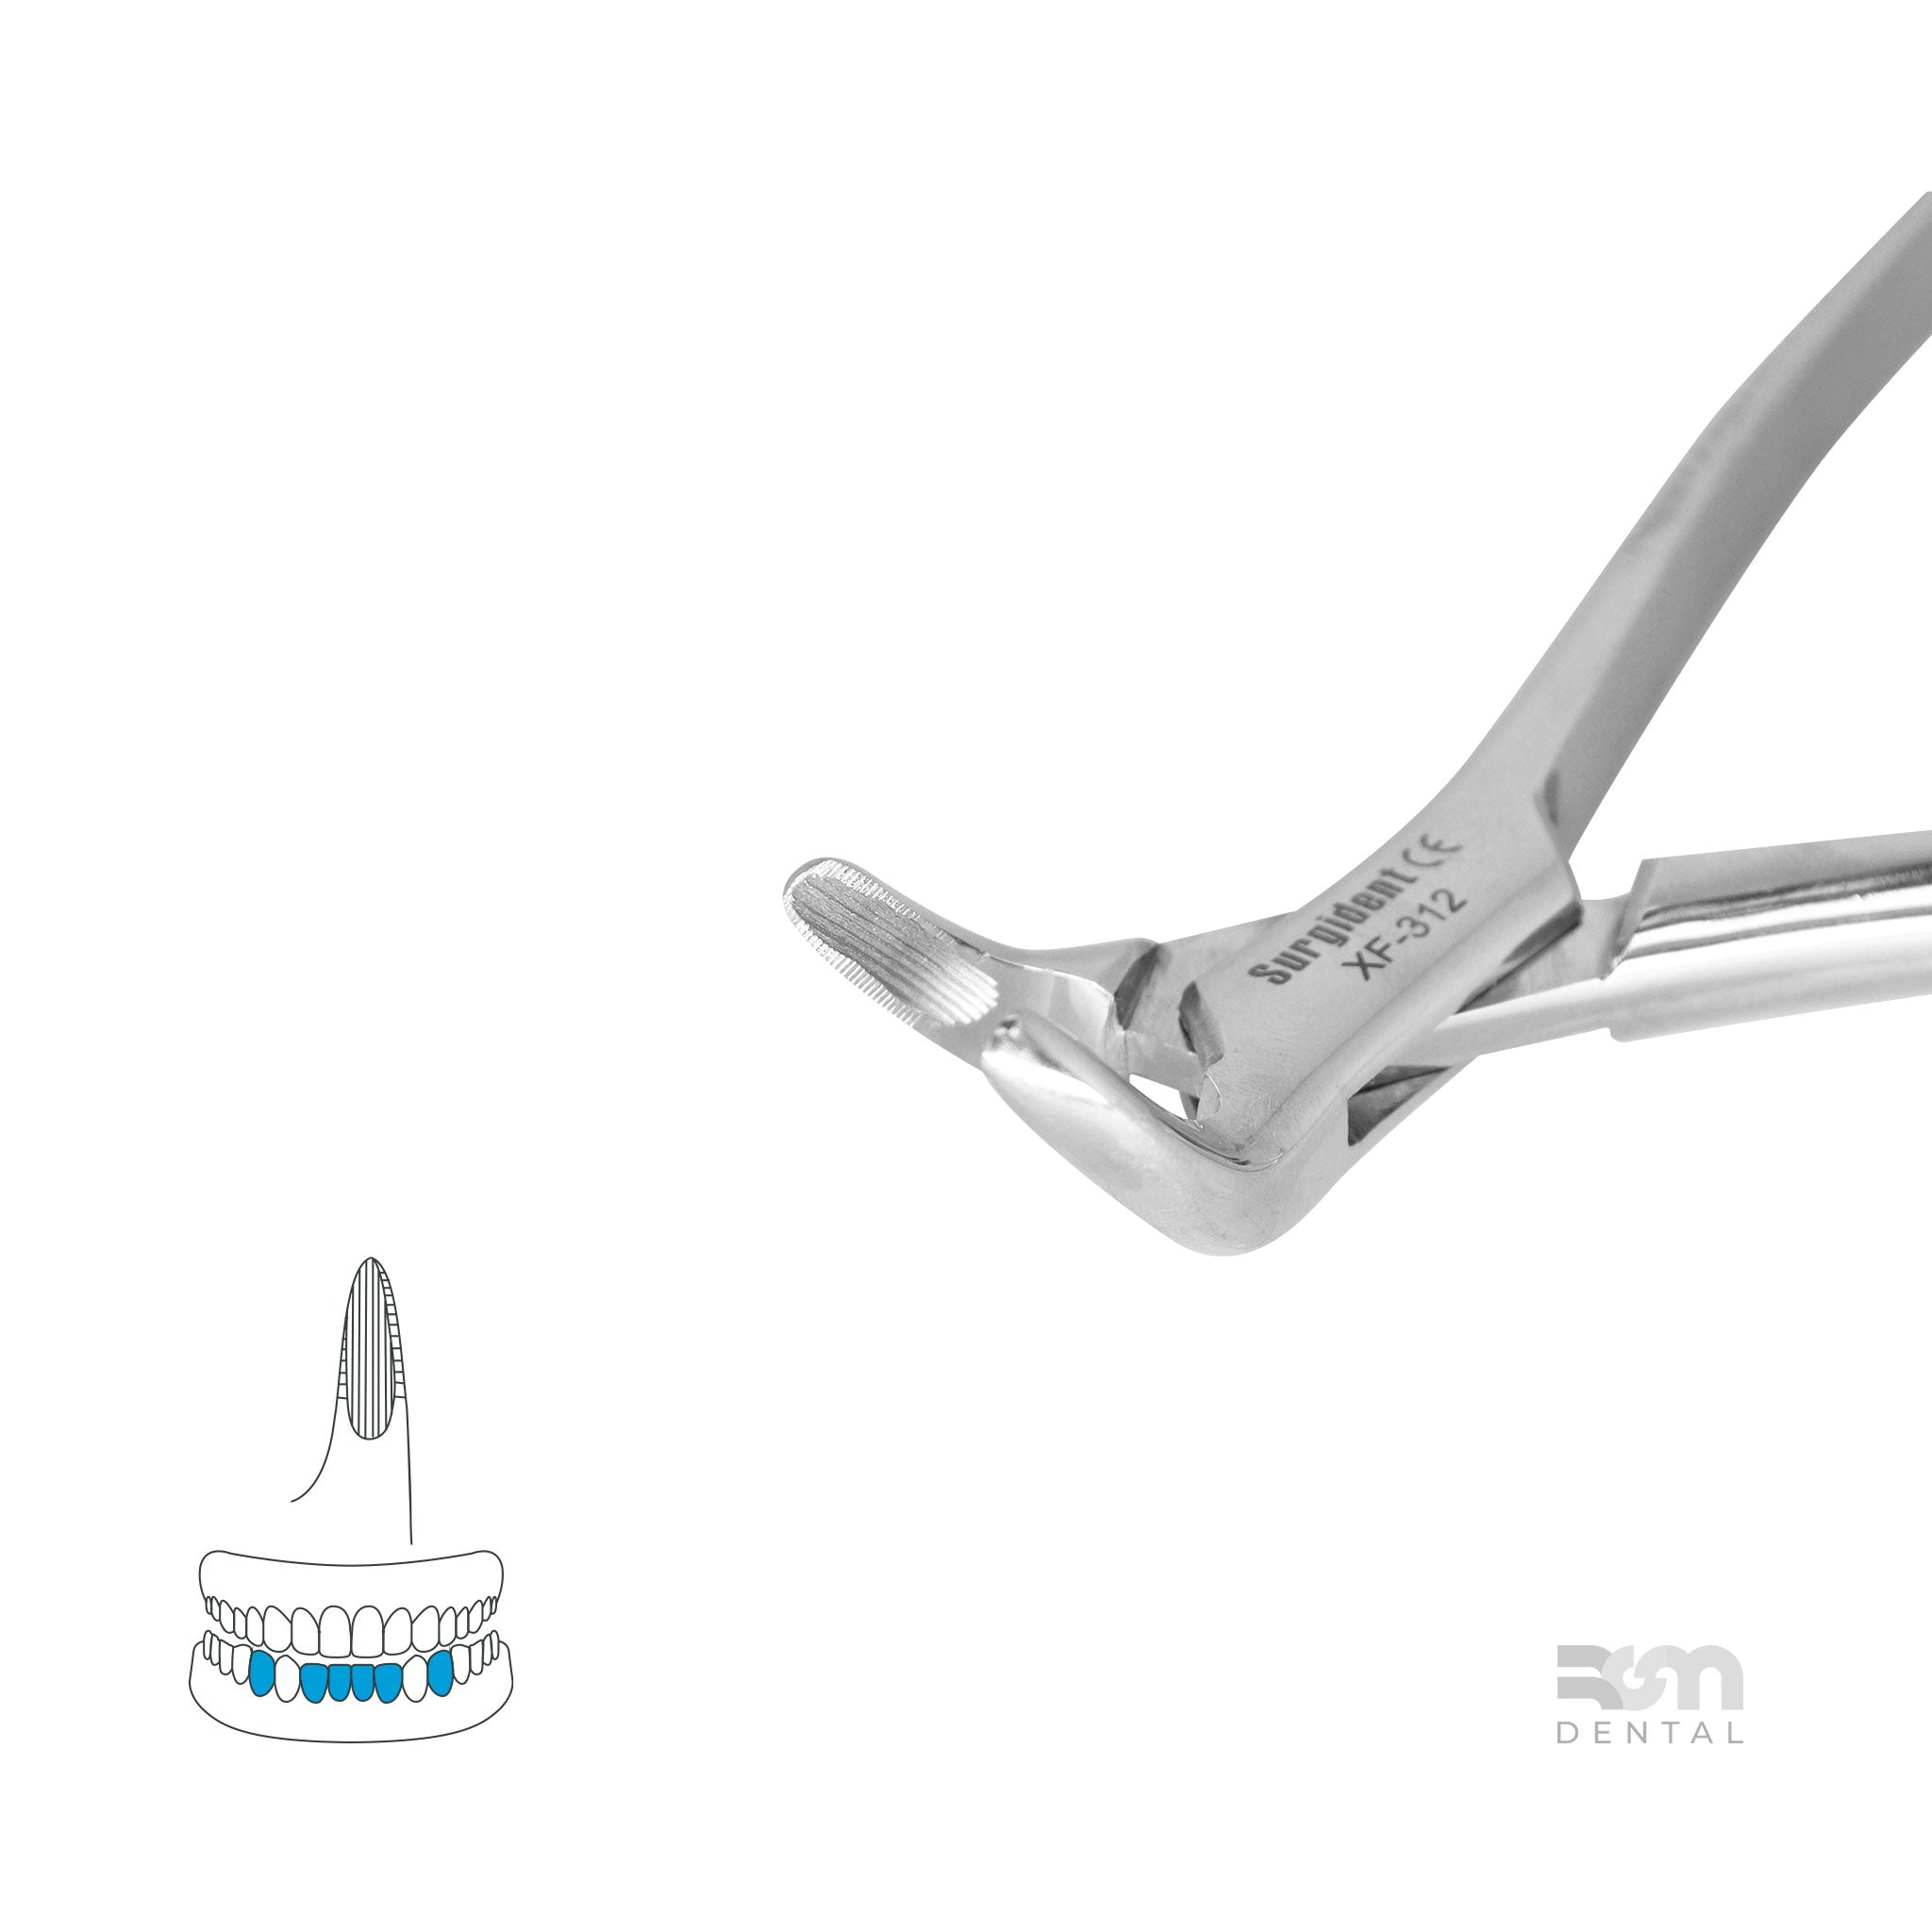 Forceps 151 : Biscuspids Incisor and Roots